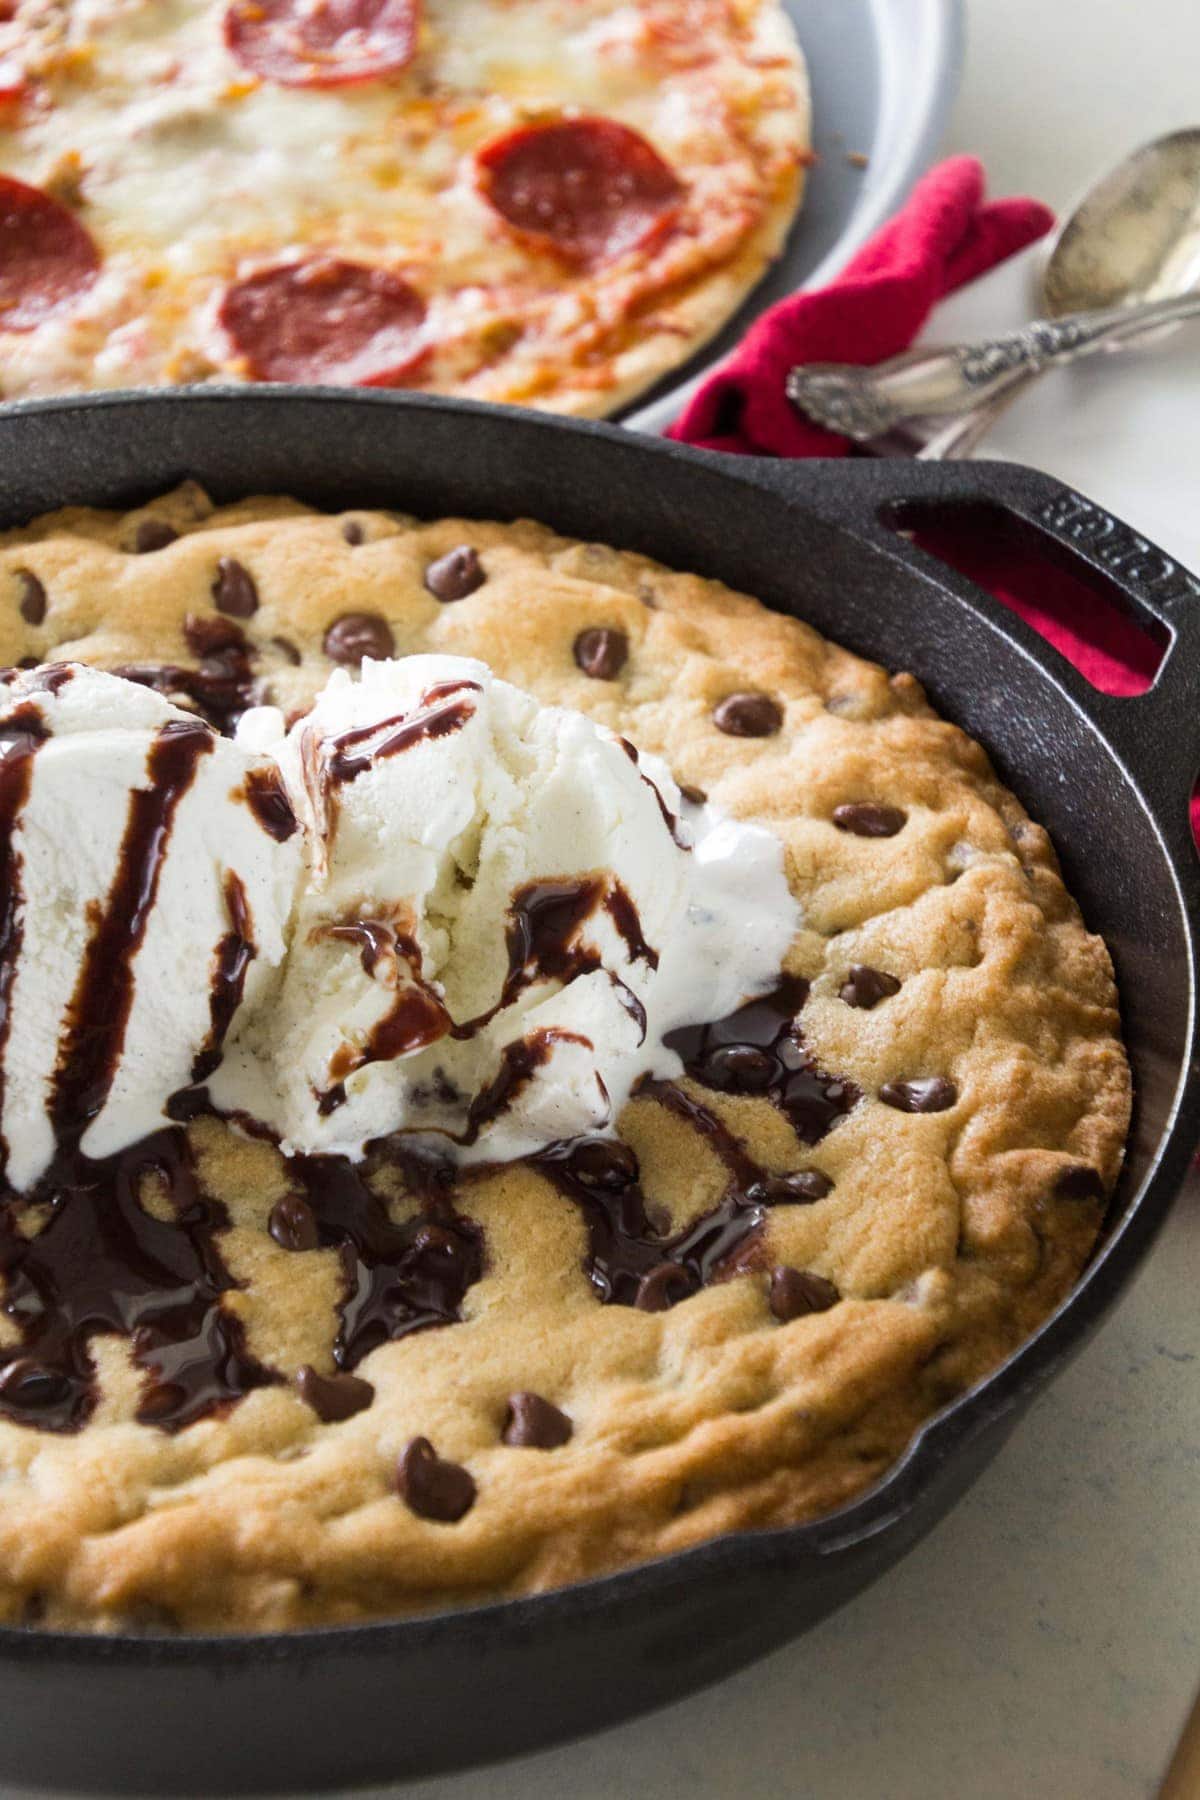  An amazing Chocolate Chip Skillet Cookie topped with ice cream and chocolate drizzle.